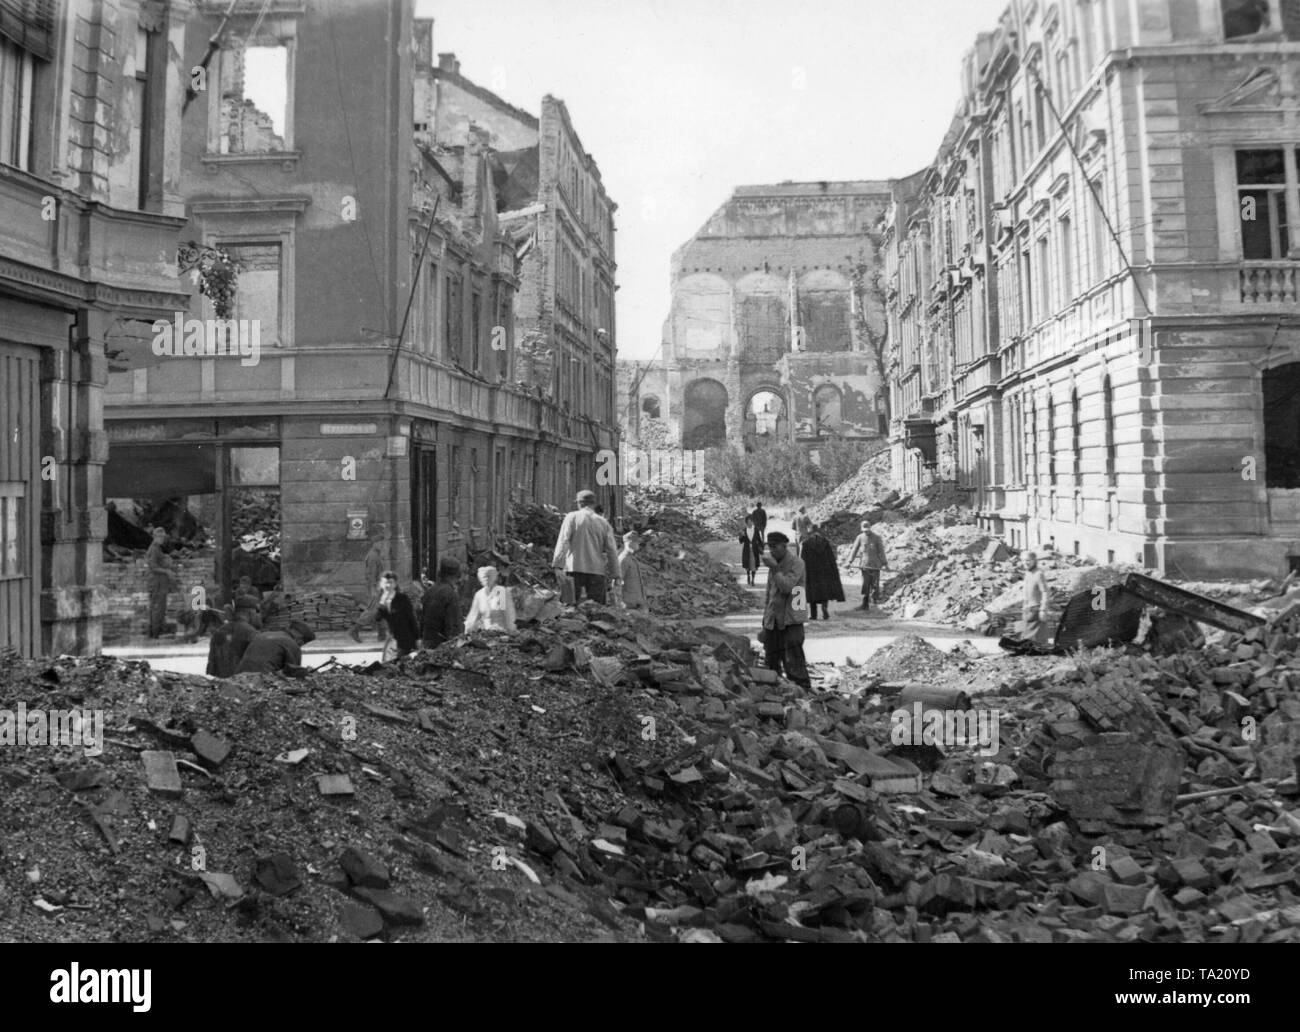 People cleaning up rubble after an Allied bombing at the intersection Schellingstrasse Schraudolphstrasse in Schwabing, Munich. In the background the destroyed Neue Pinakothek. Stock Photo